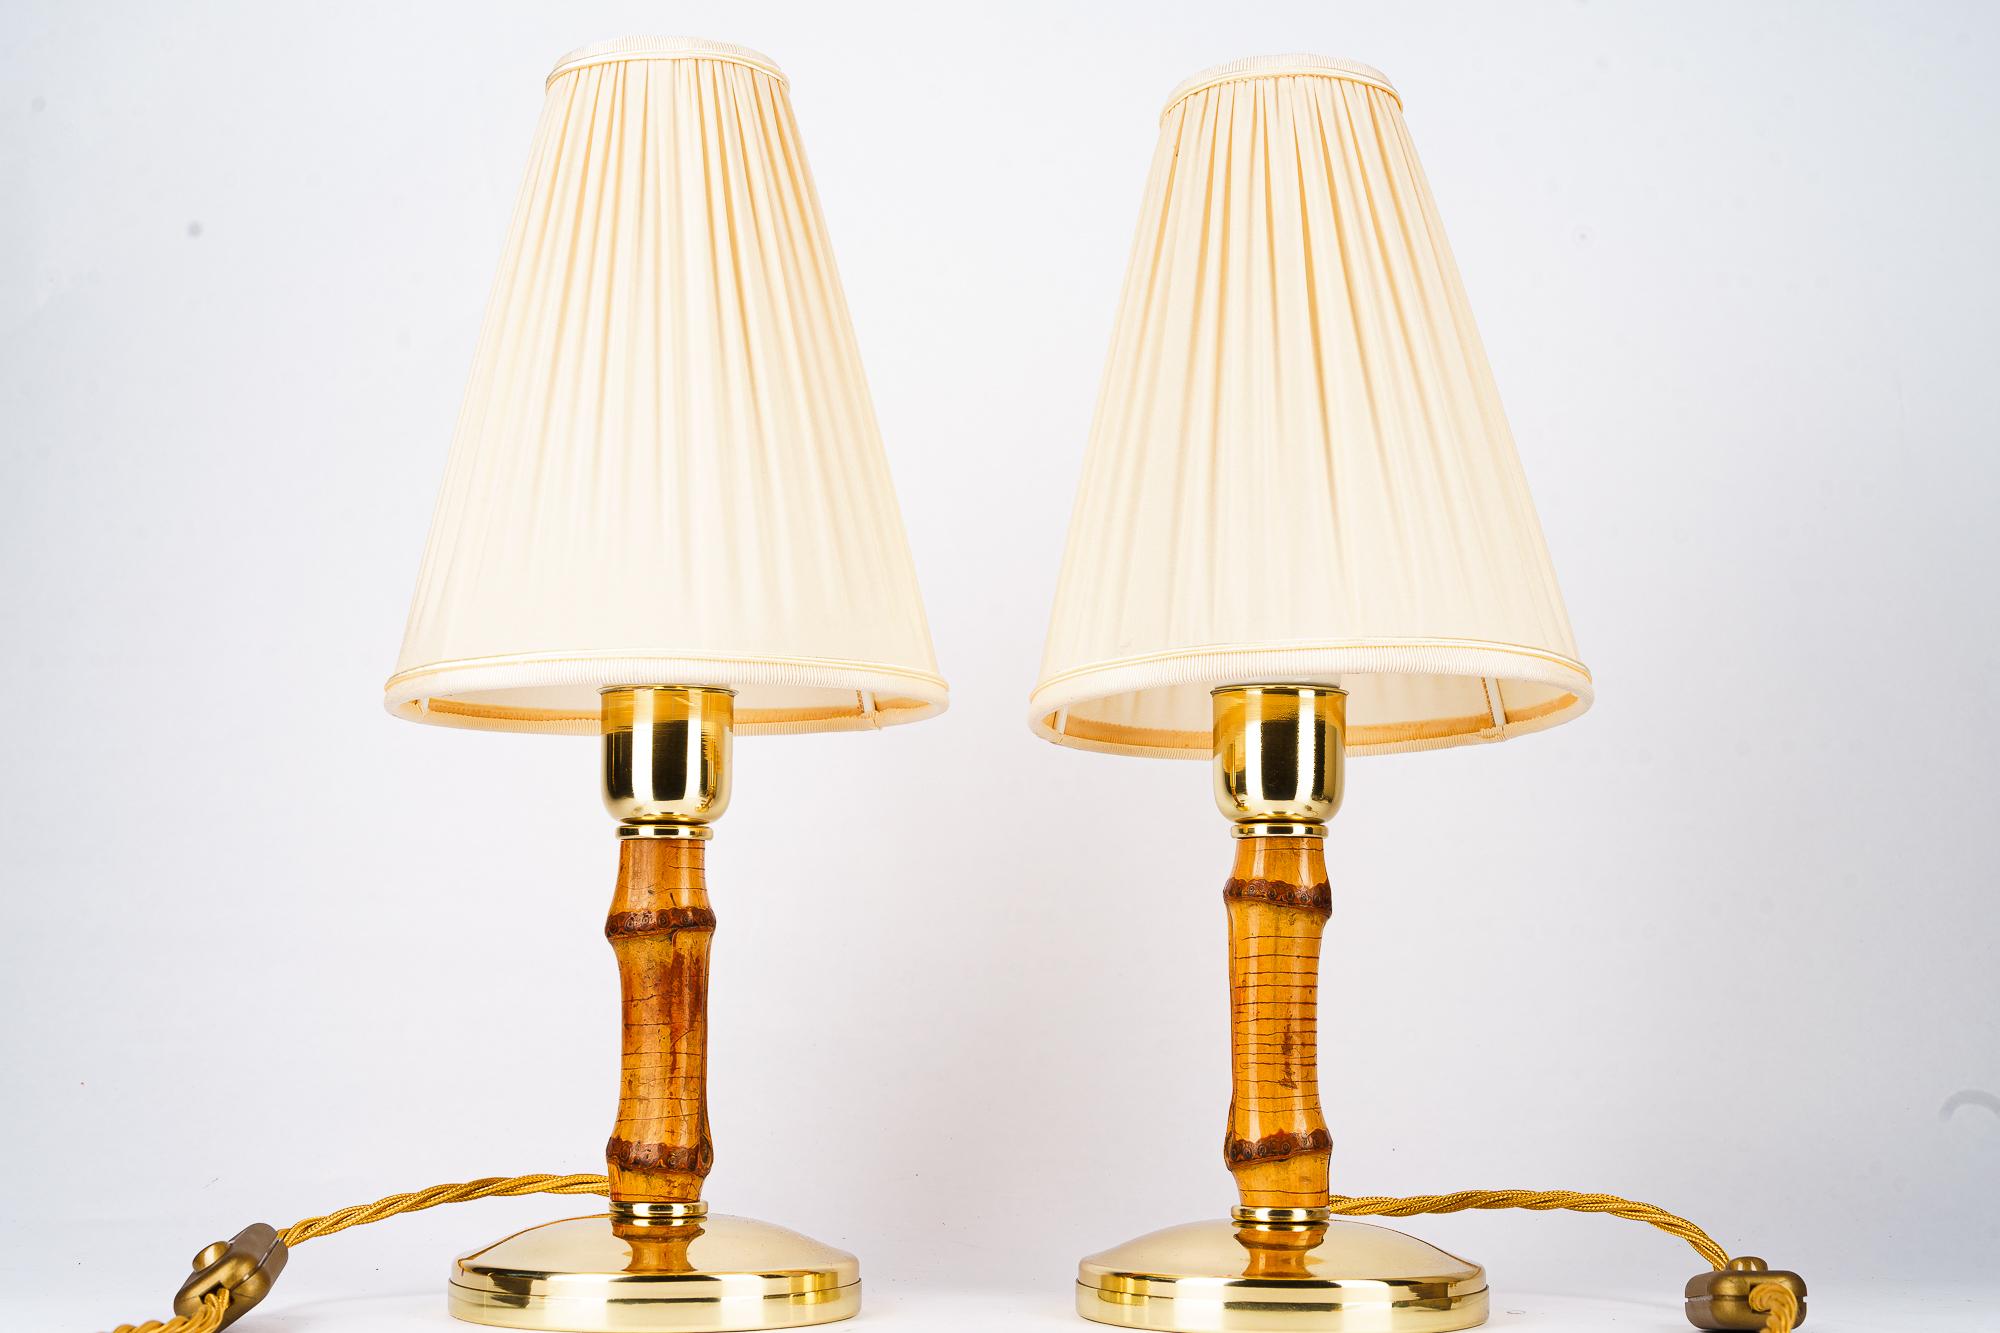 2 Rupert Nikoll Bamboo Table Lamps with Fabric Shades Austria Around 1950s
Brass polished and stove enameled
The fabric shades are replaced ( new )
Pair price.